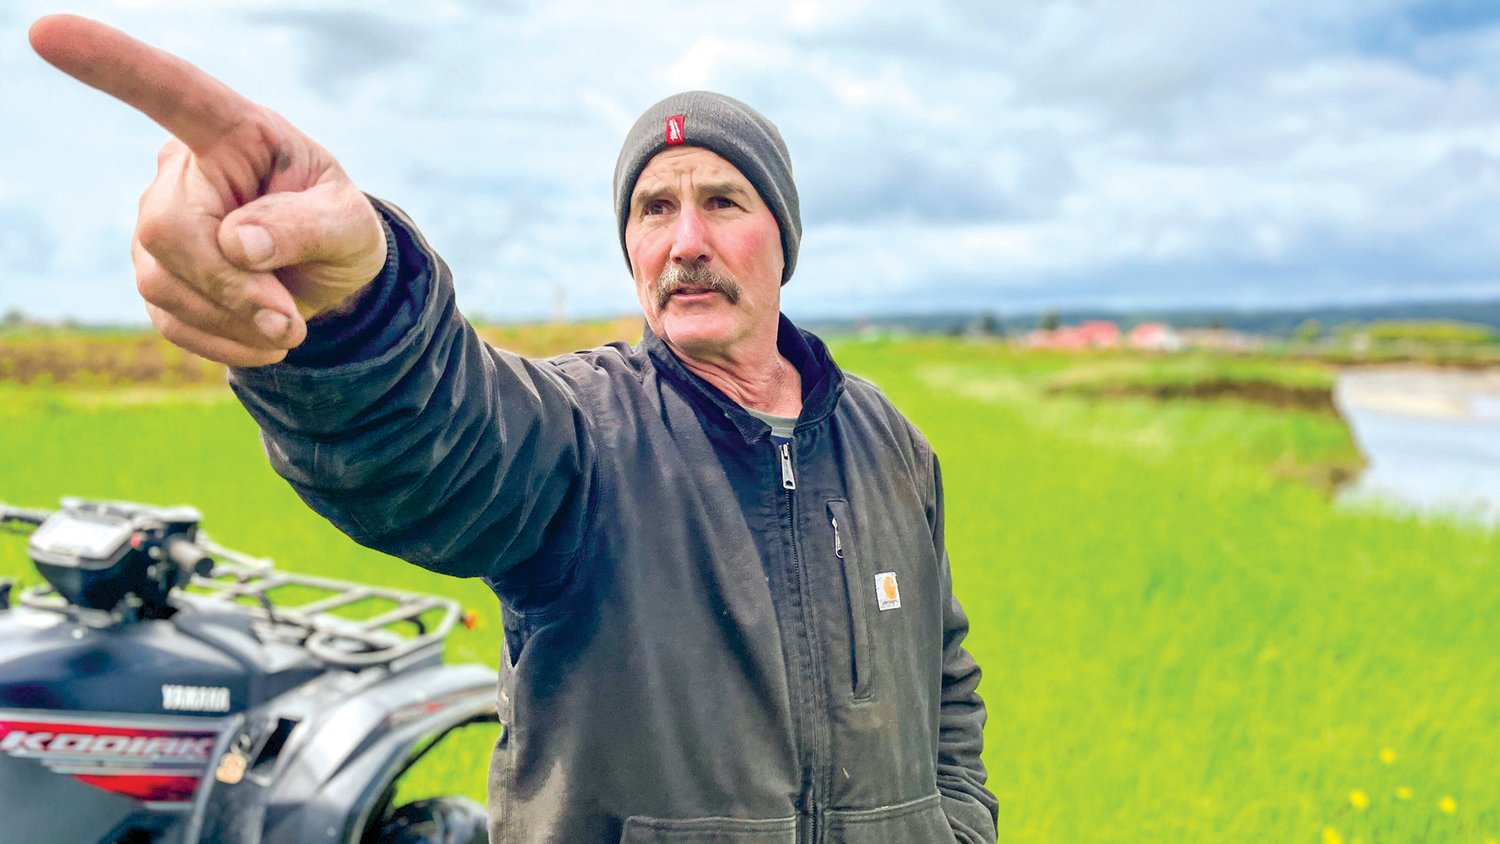 Steve Willis, a farmer who lives near the confluence of Satsop and Chehalis Rivers points and talks about erosion to farm land.